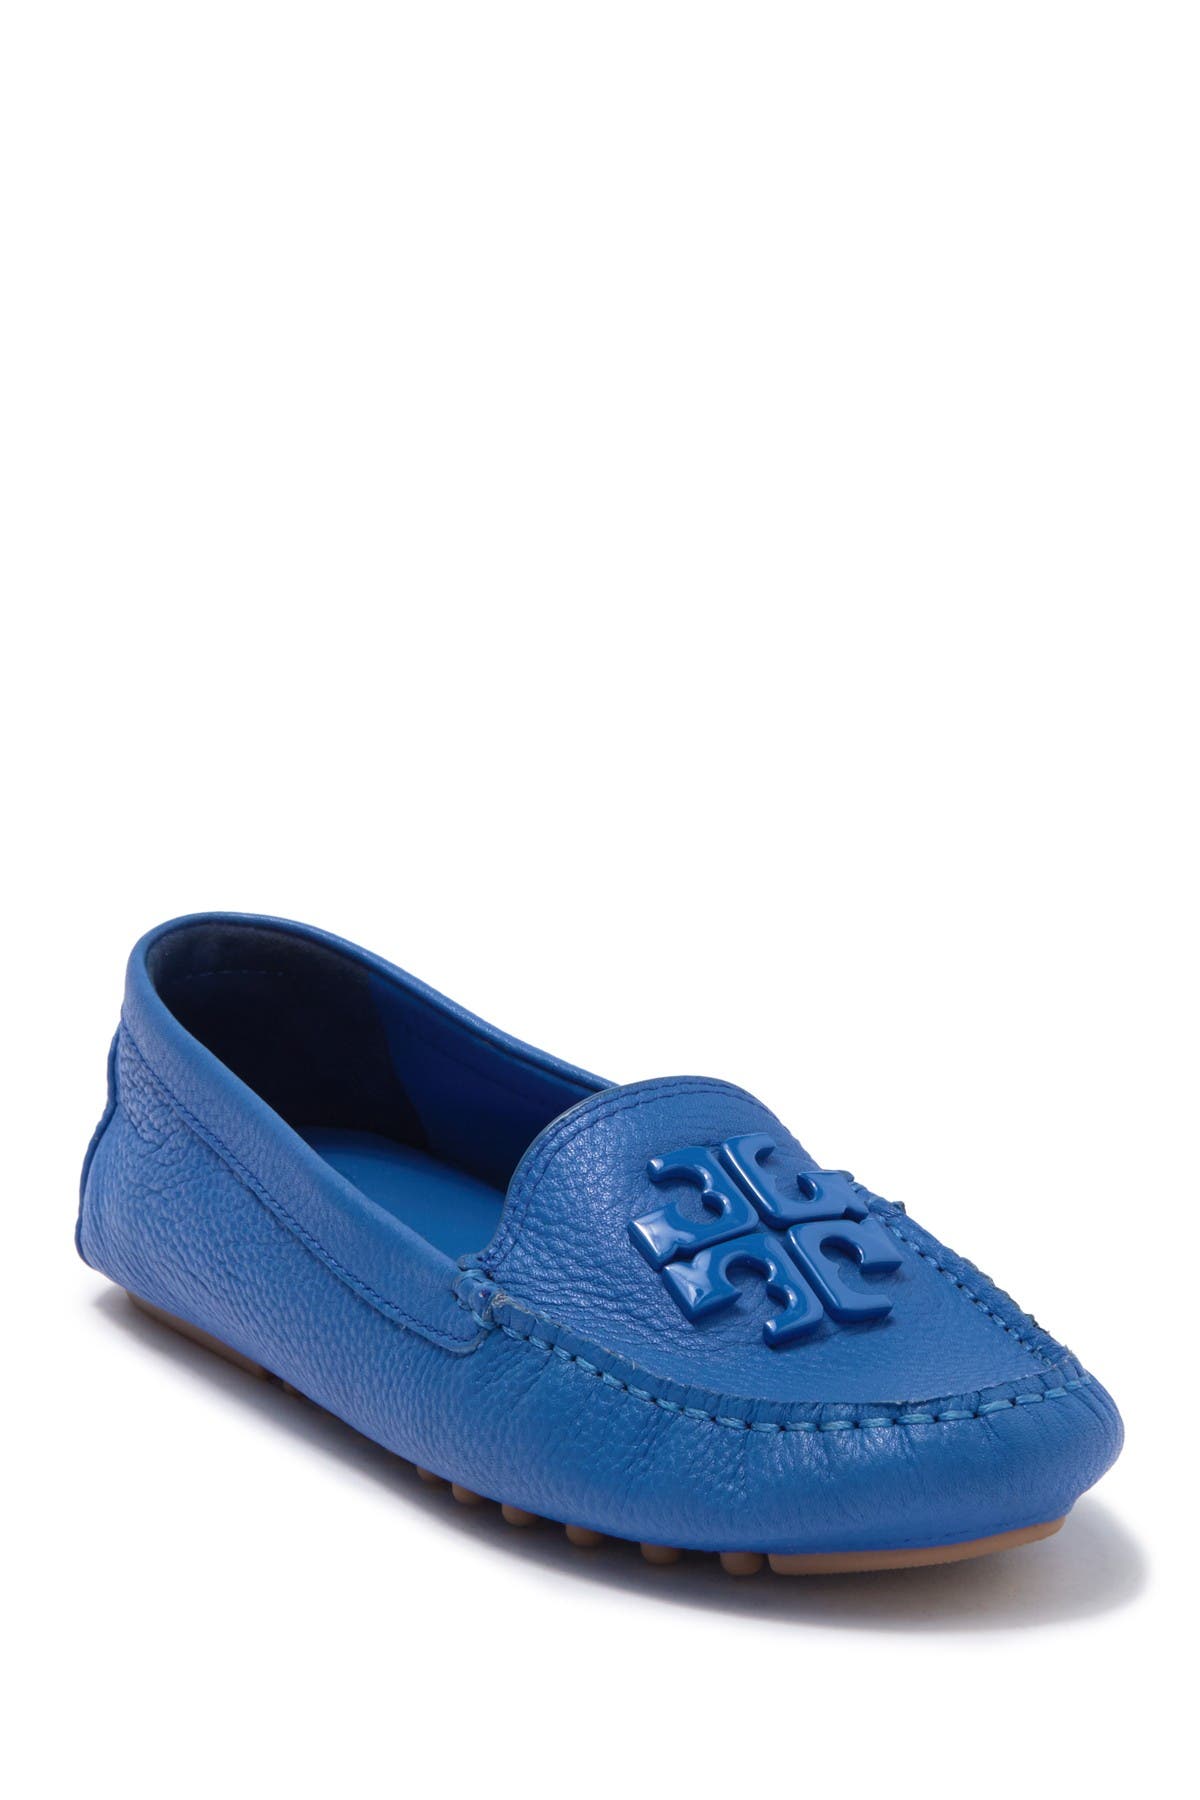 Tory Burch | Lowell Driver Loafer 